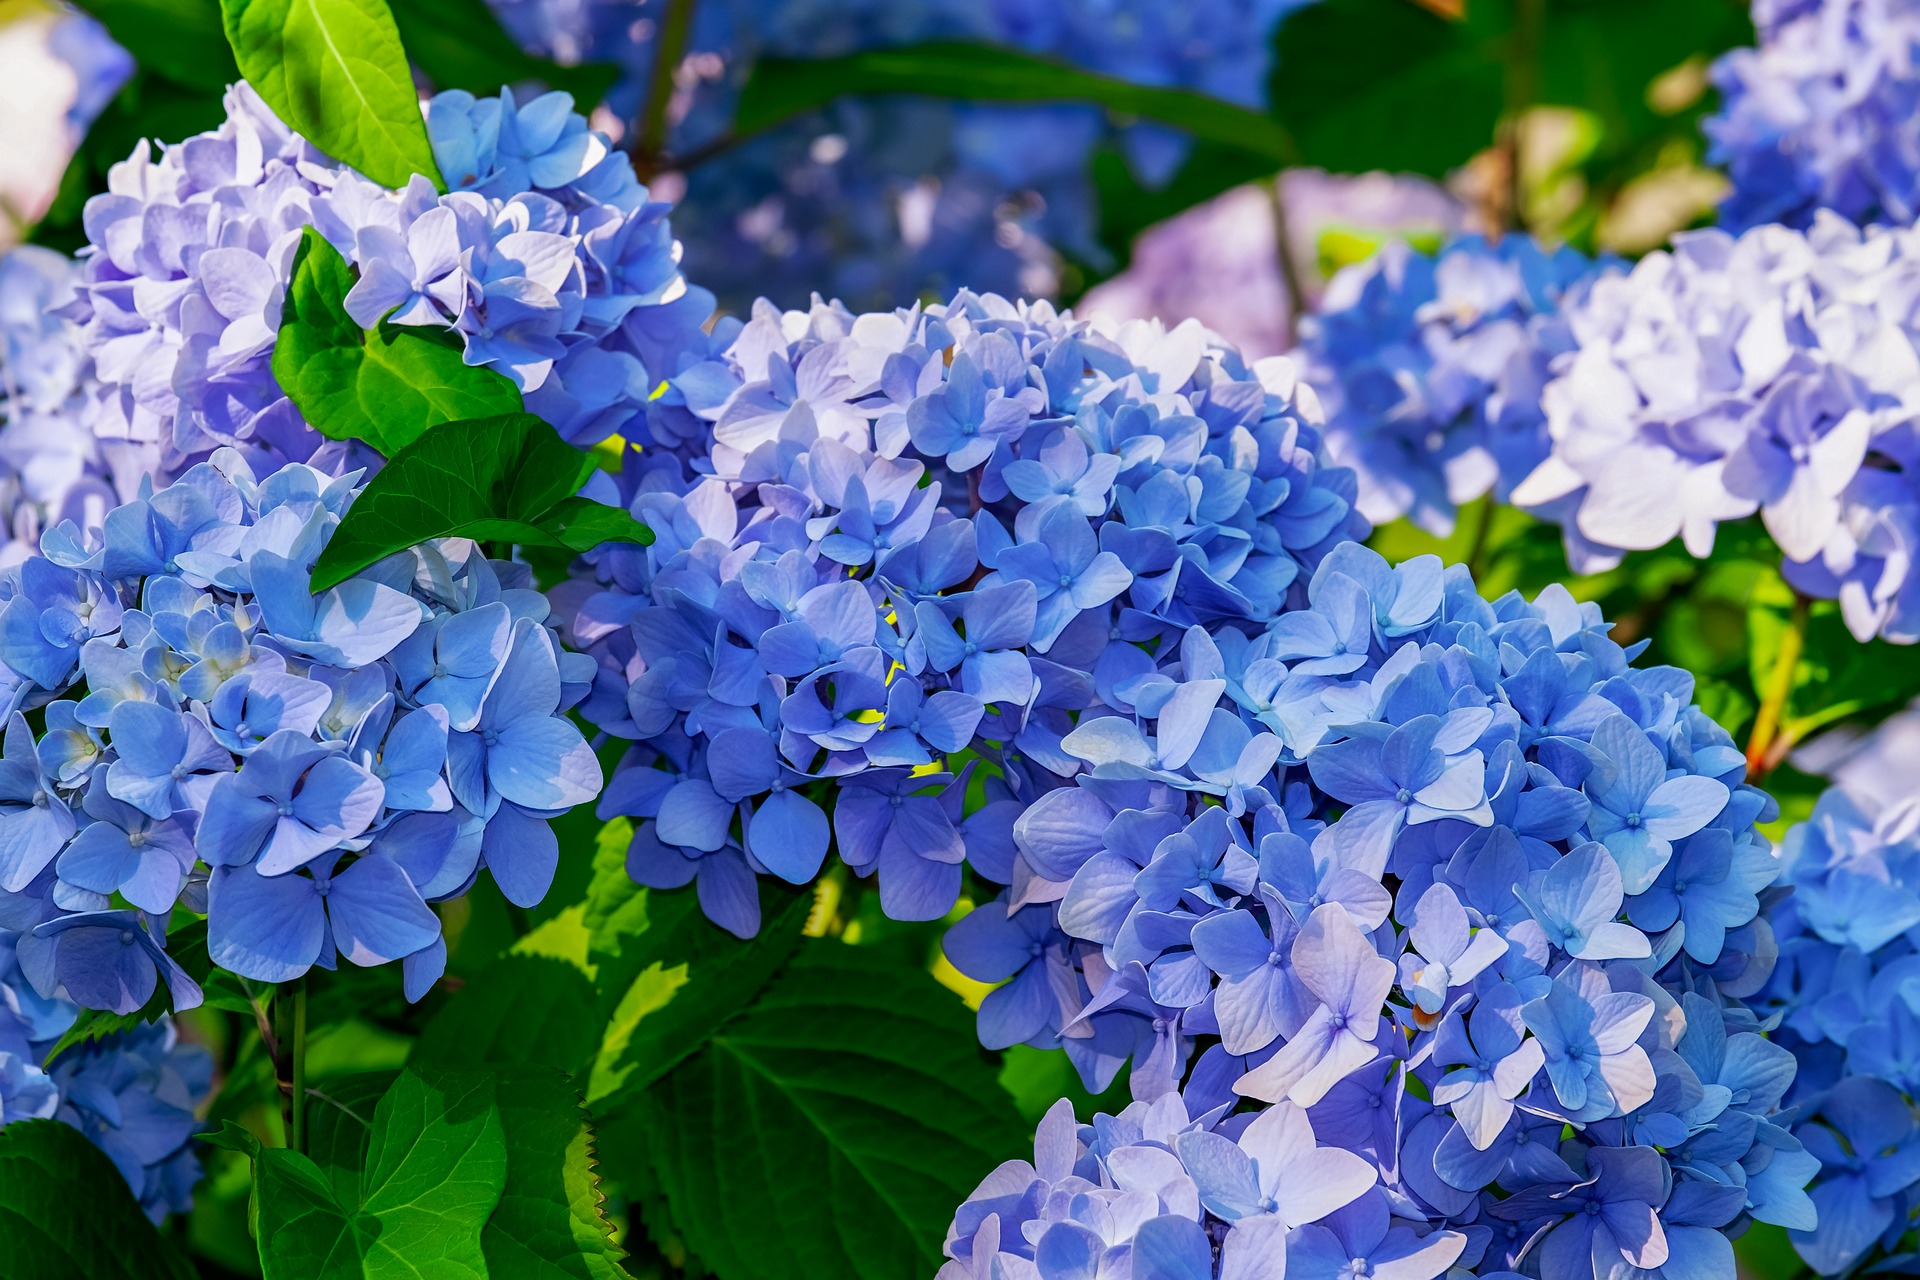 When choosing small shrubs for landscaping, it's good to know that flowering options, like compact hydrangeas shown here, are out there and a blooming yard is not out of reach!